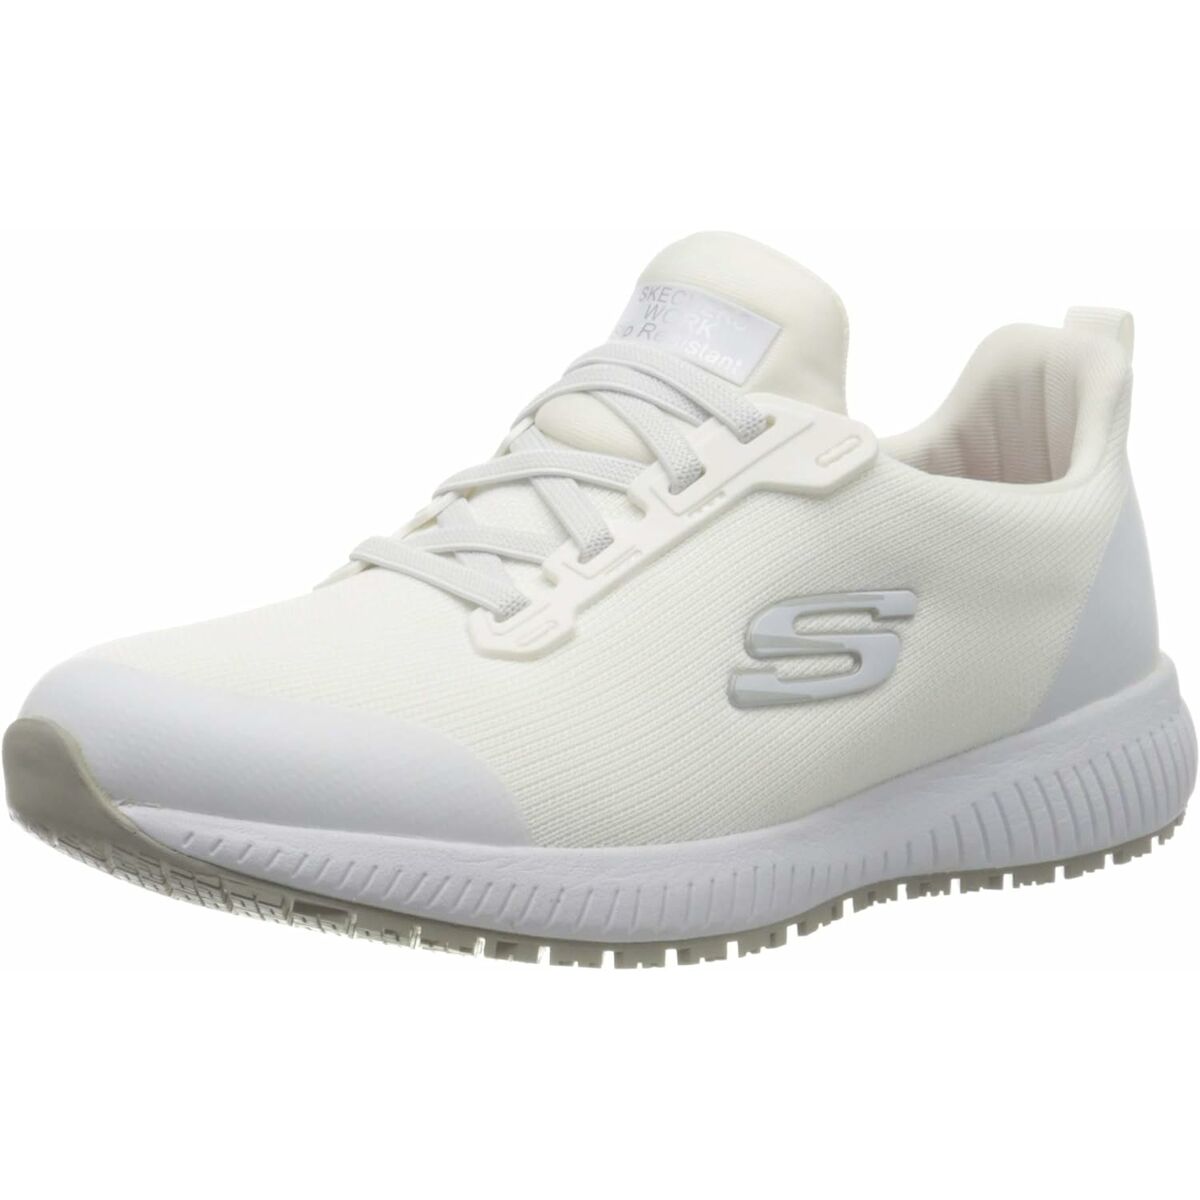 Sports Trainers for Women Skechers SQUAD White